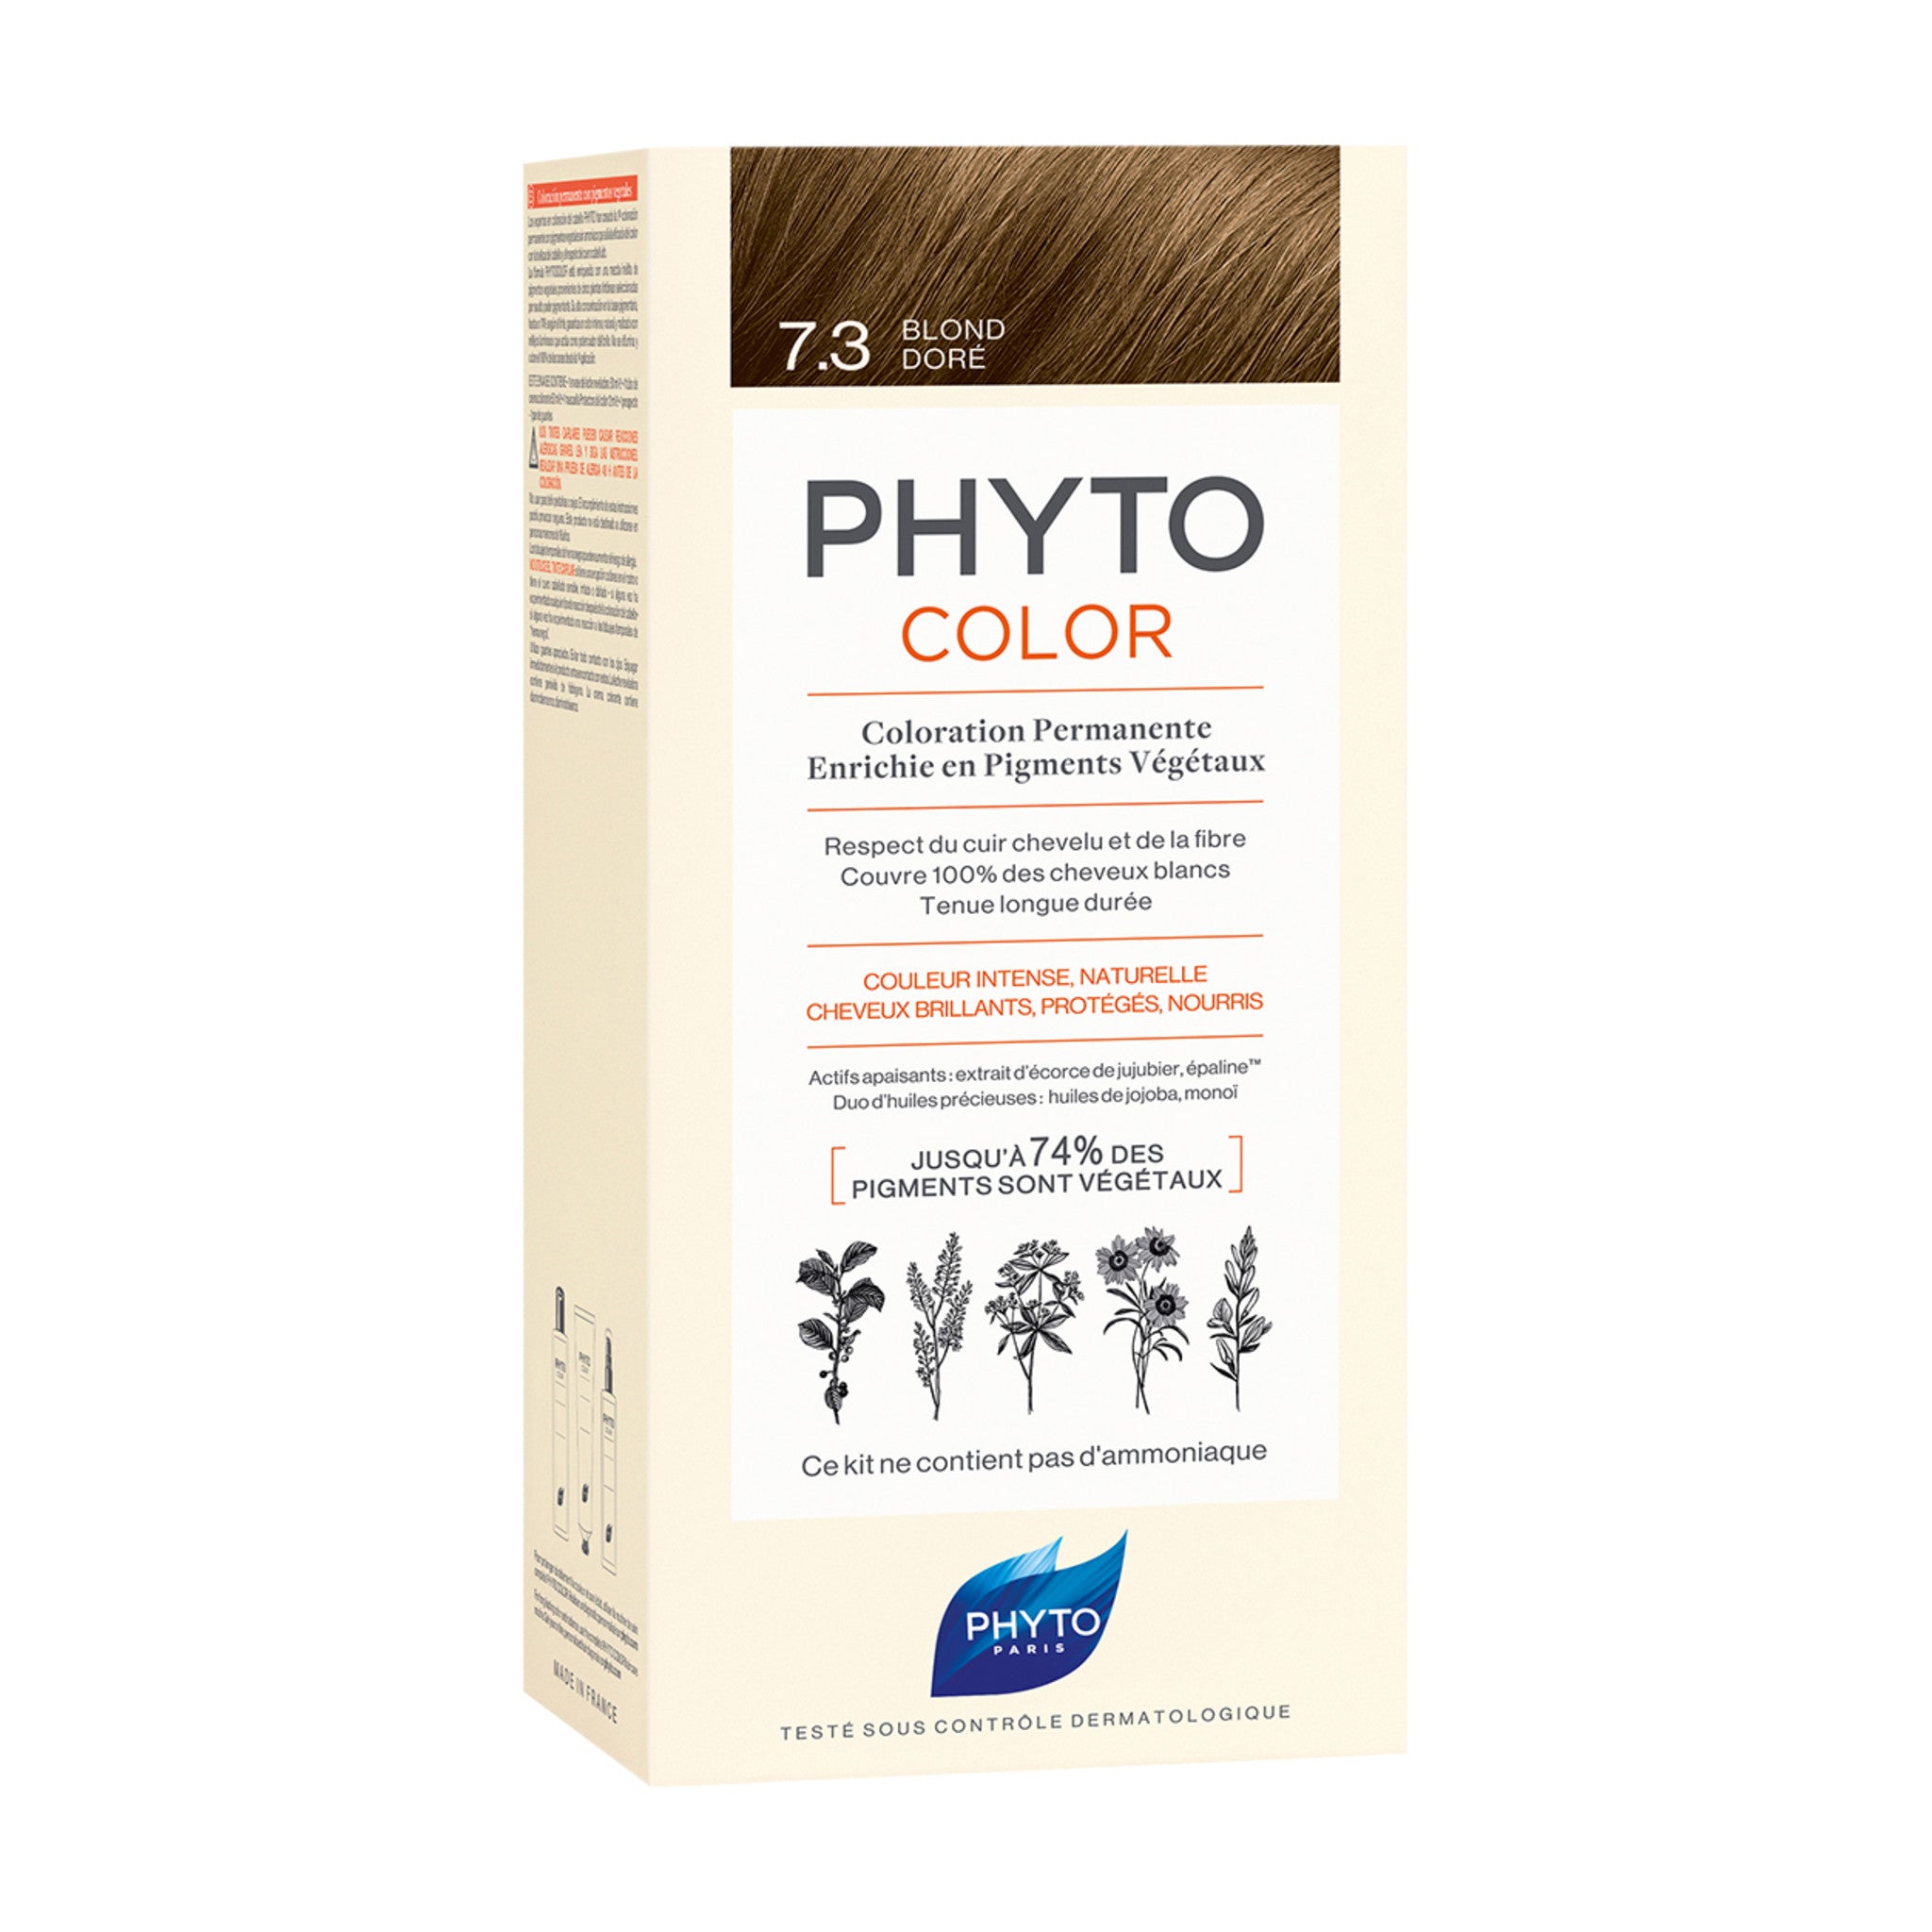 Phyto Phytocolor Color/Shade variant: 7.3 Golden Blond main image.